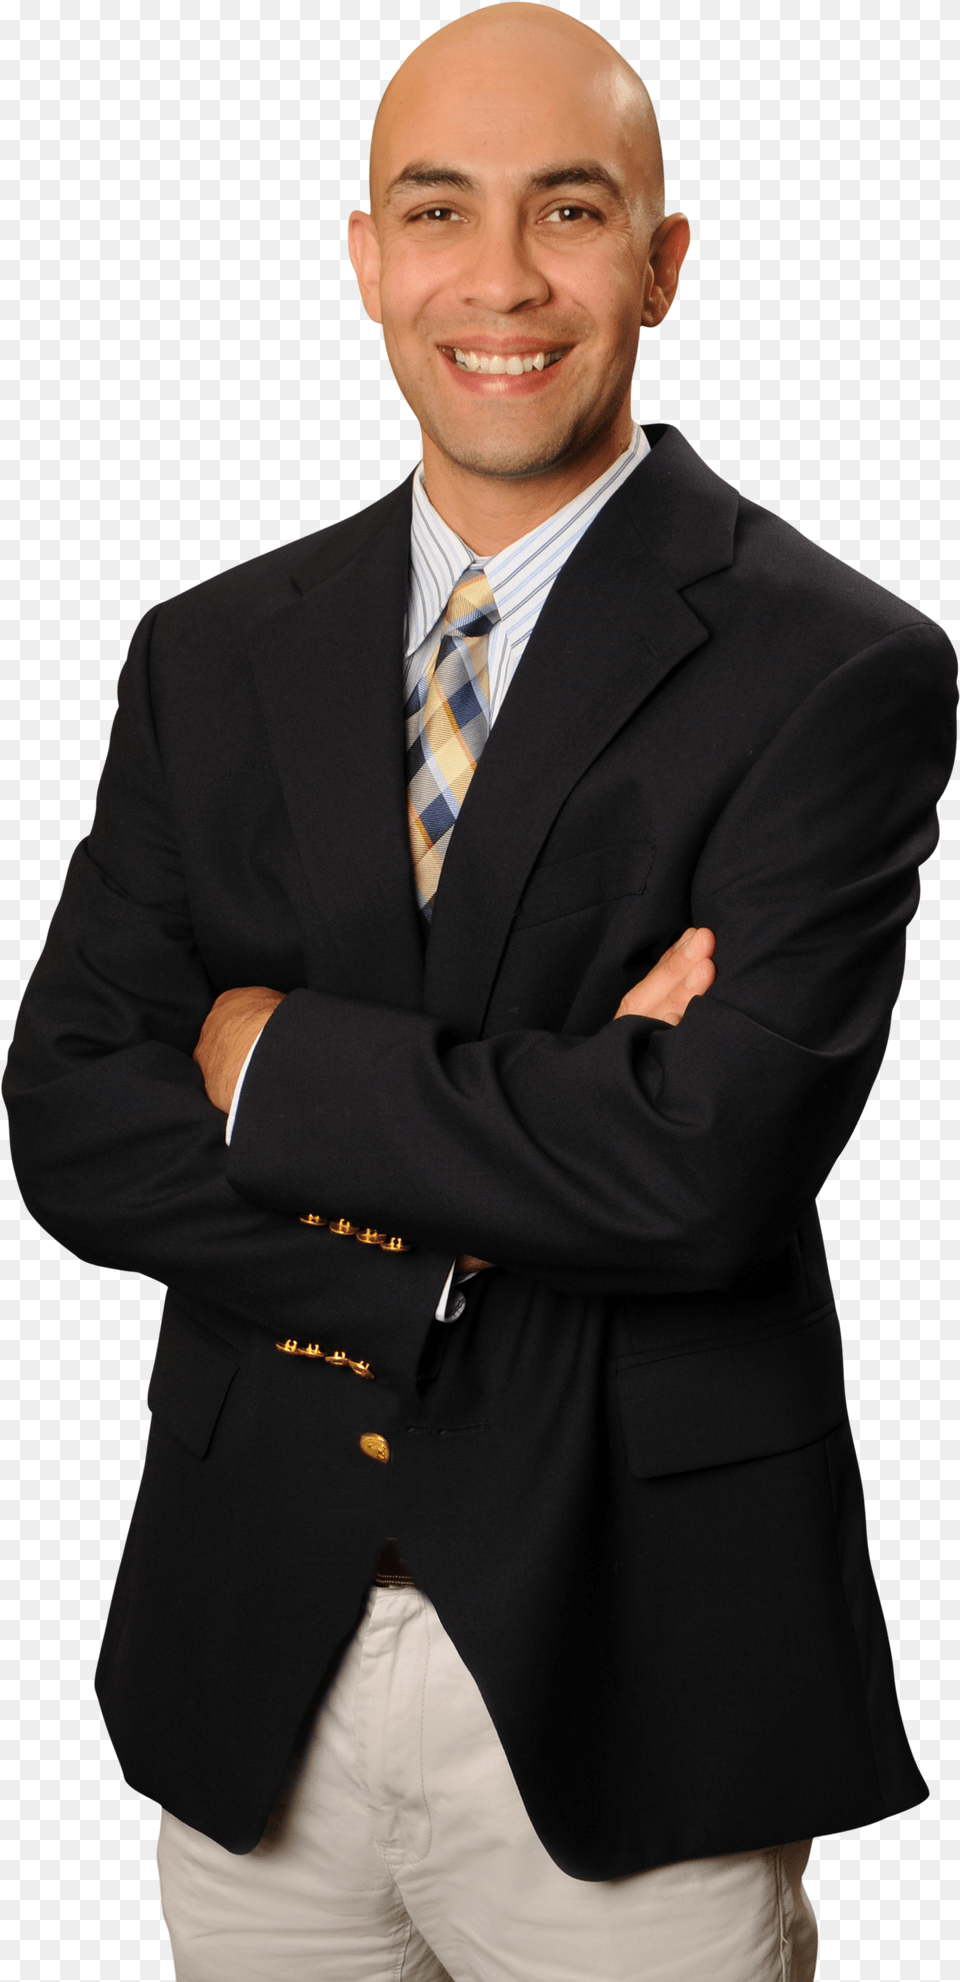 Your King Pierce And Thurston County Real Estate Agent, Accessories, Jacket, Suit, Formal Wear Png Image